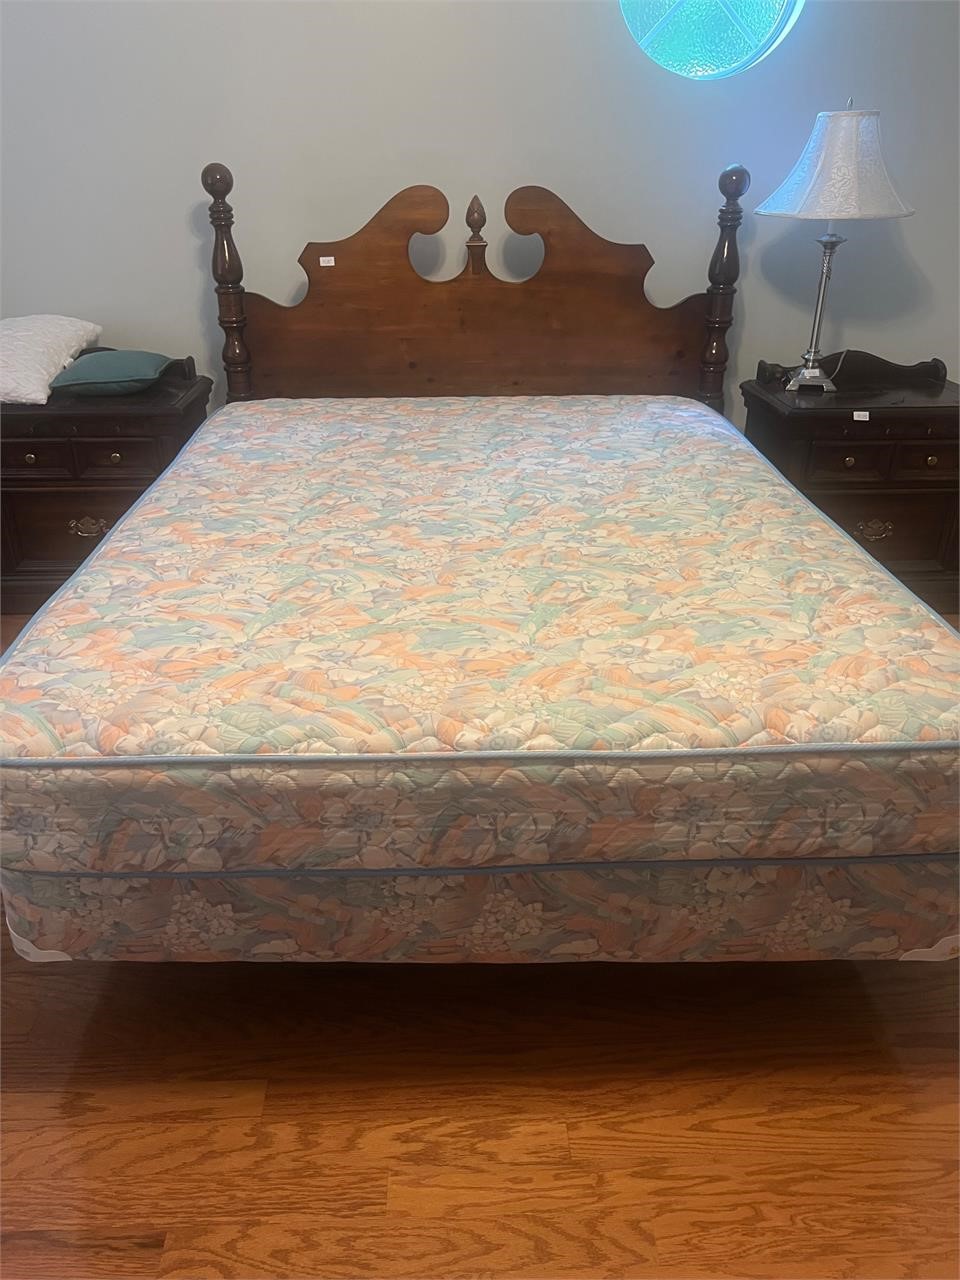 QUEEN SIZE BED WITH HEADBOARD FRAME AND MATTRESS